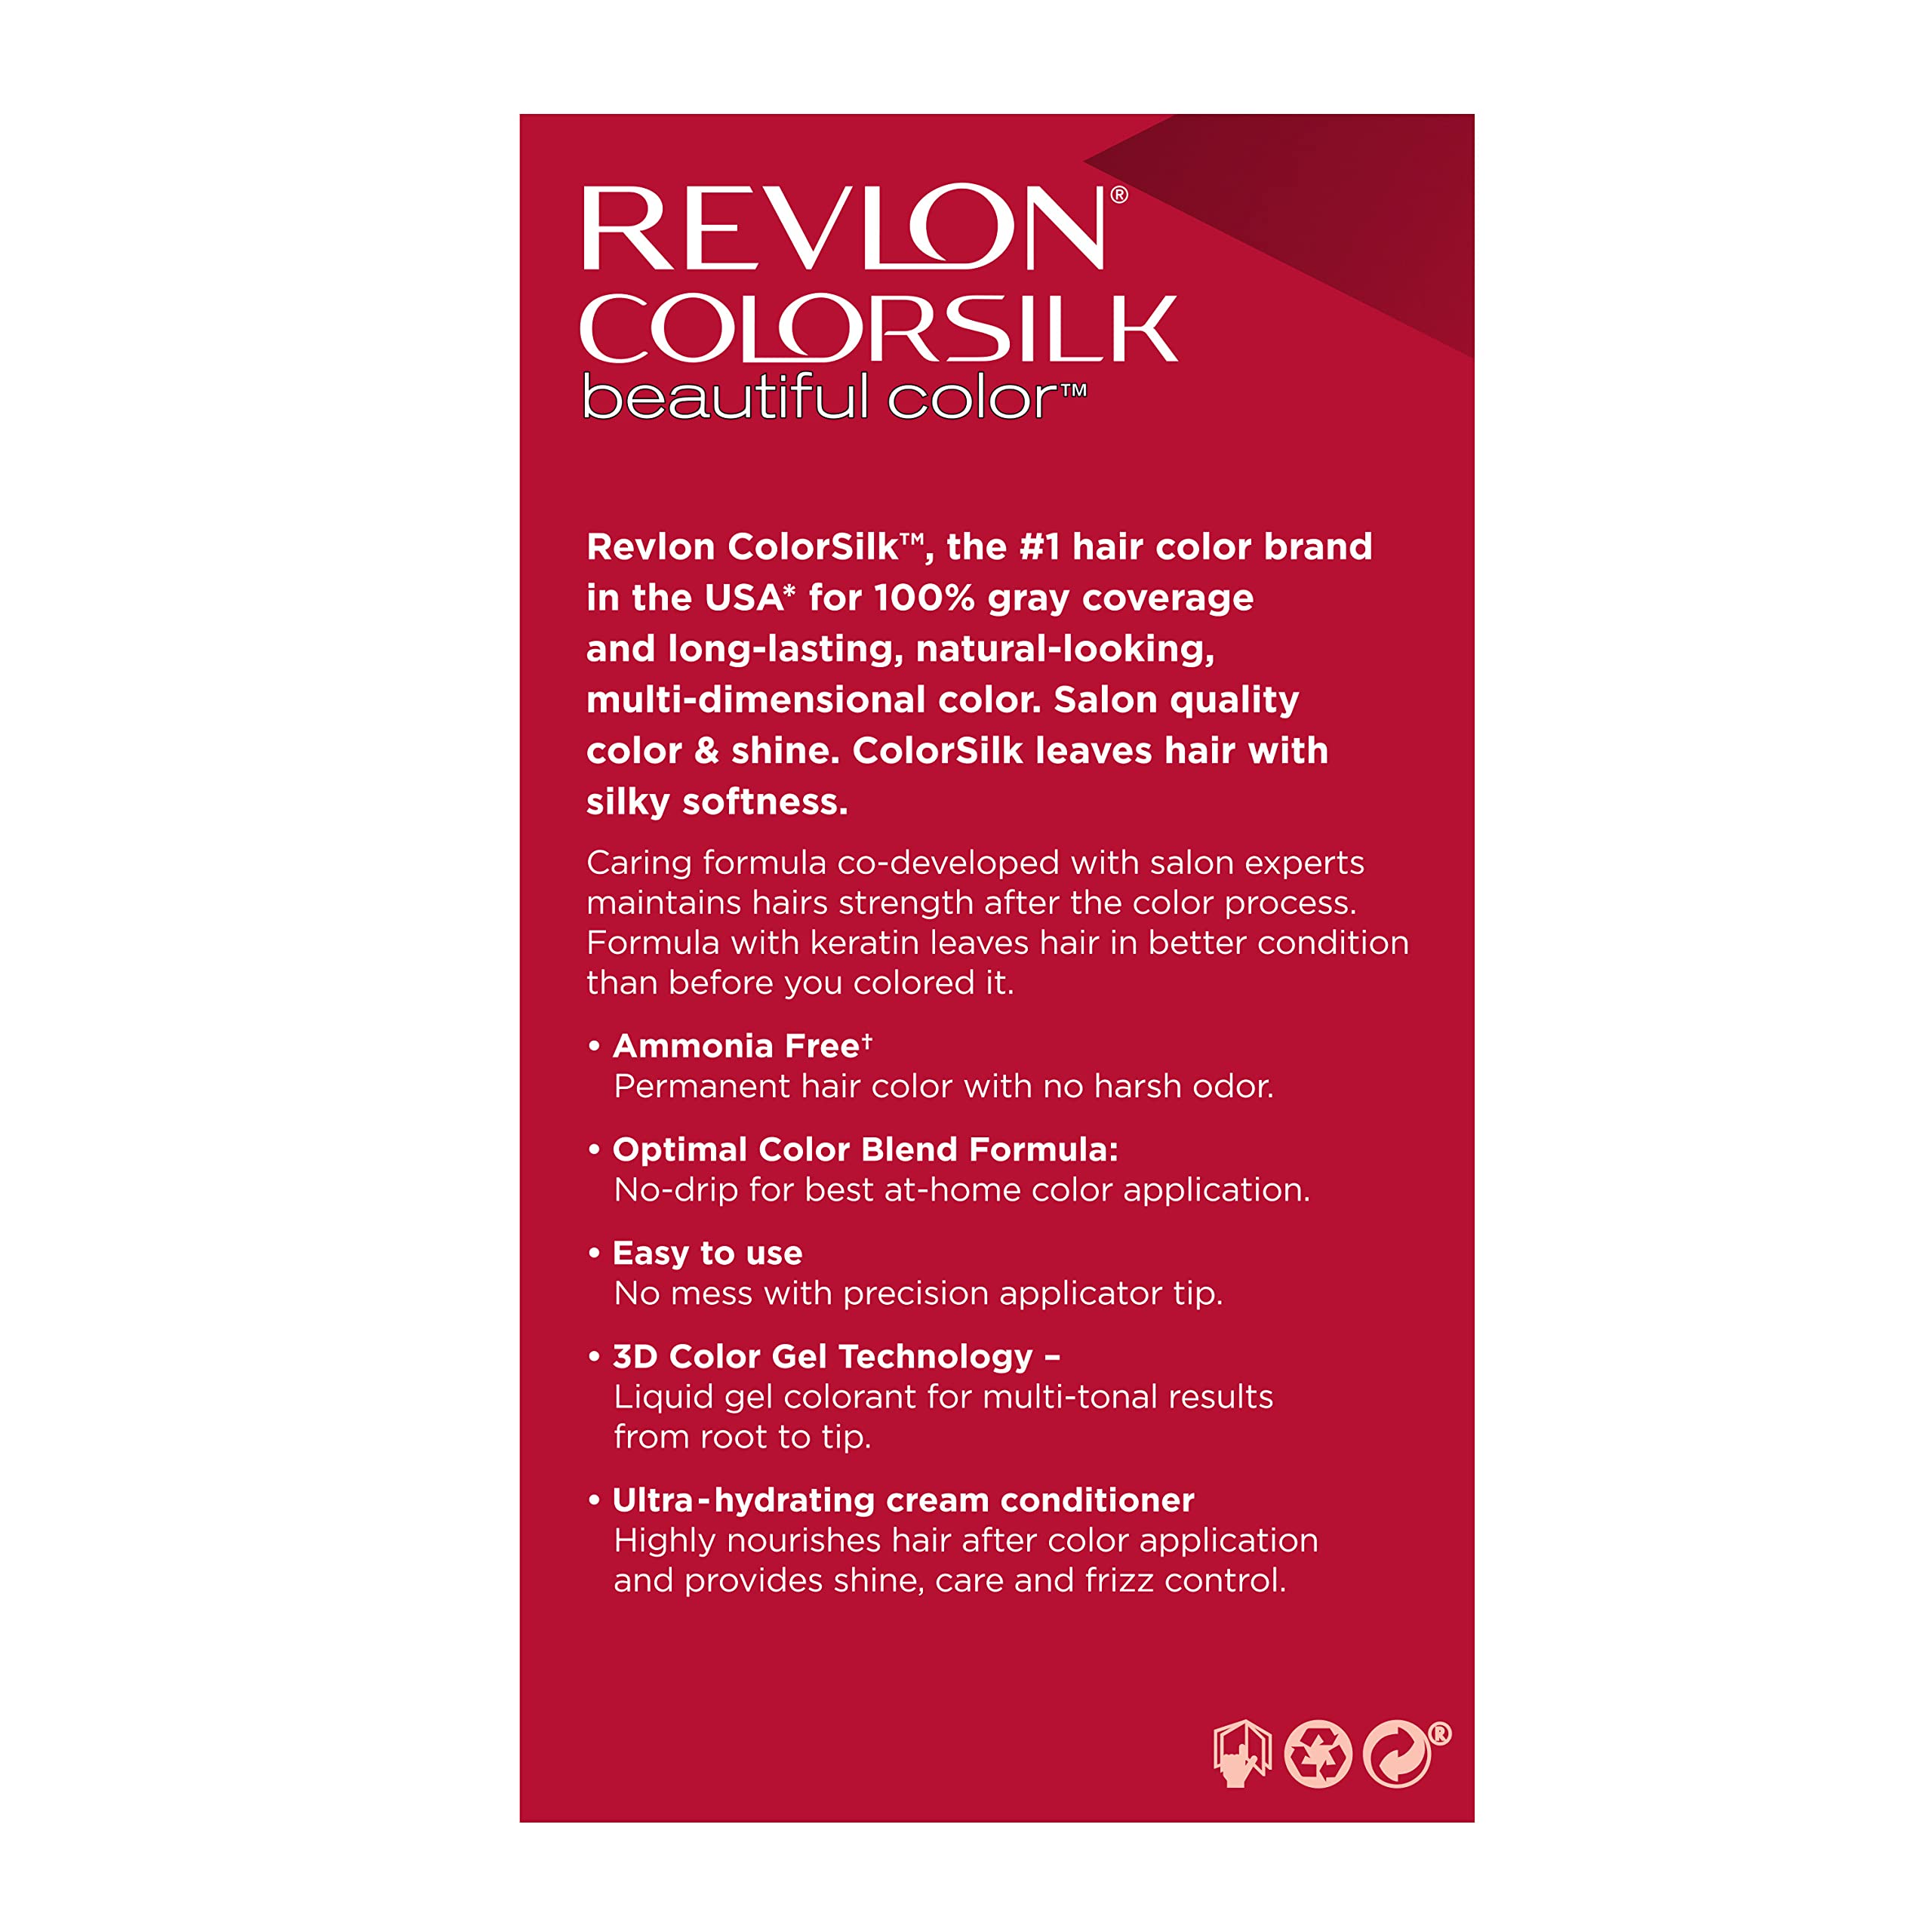 Revlon Permanent Hair Color, Permanent Blonde Hair Dye, Colorsilk with 100% Gray Coverage, Ammonia-Free, Keratin and Amino Acids, Blonde Shades (Pack of 3)